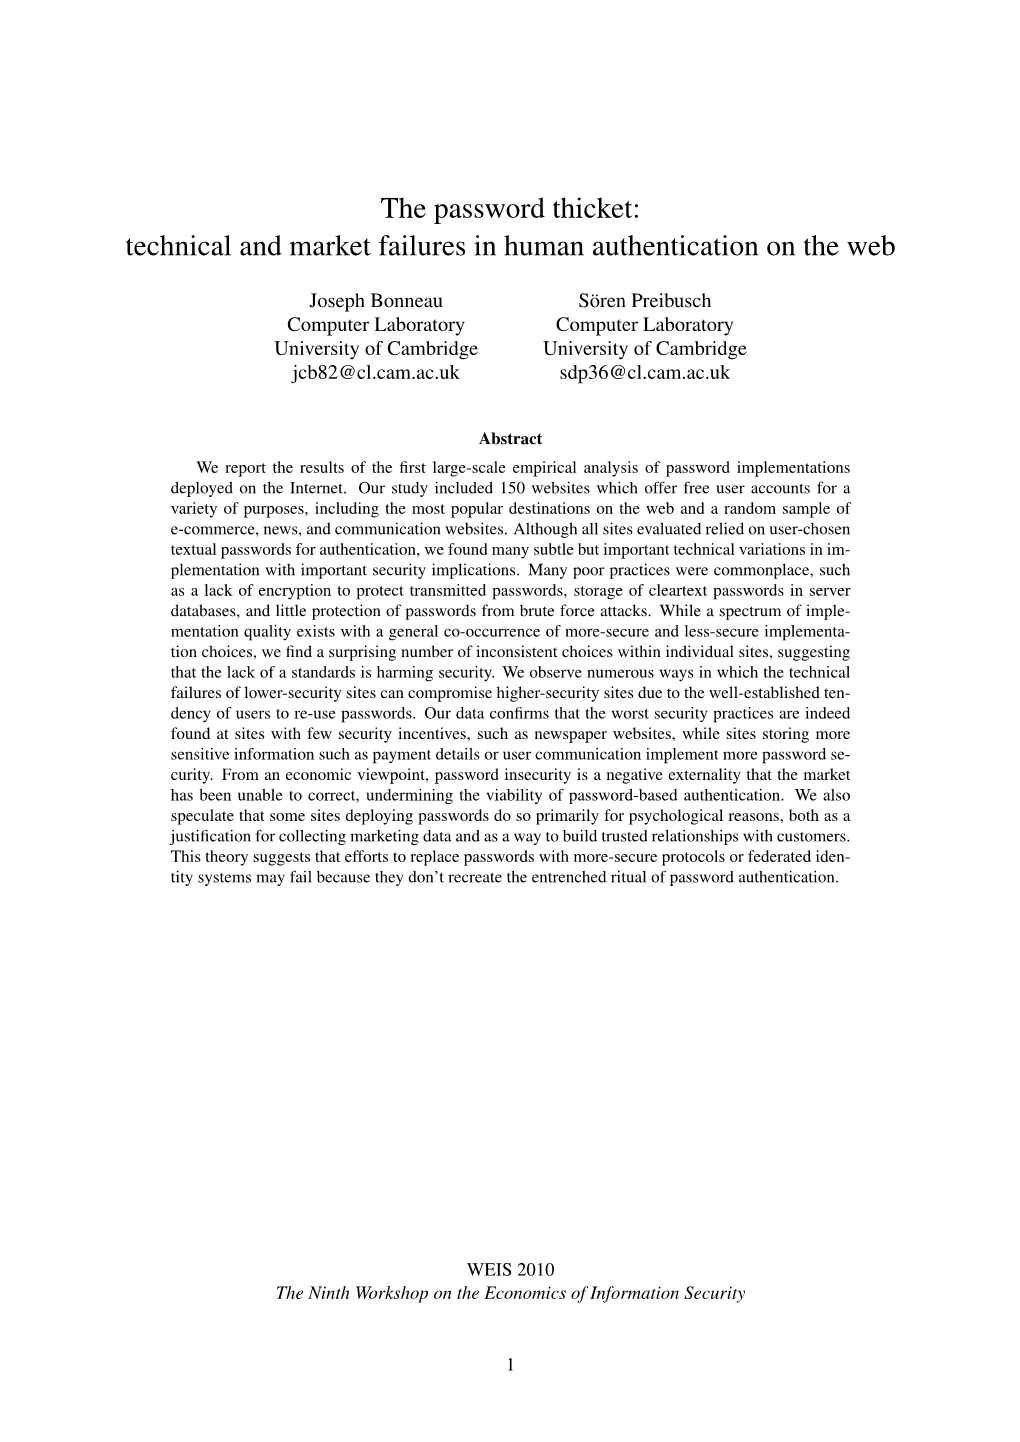 Technical and Market Failures in Human Authentication on the Web